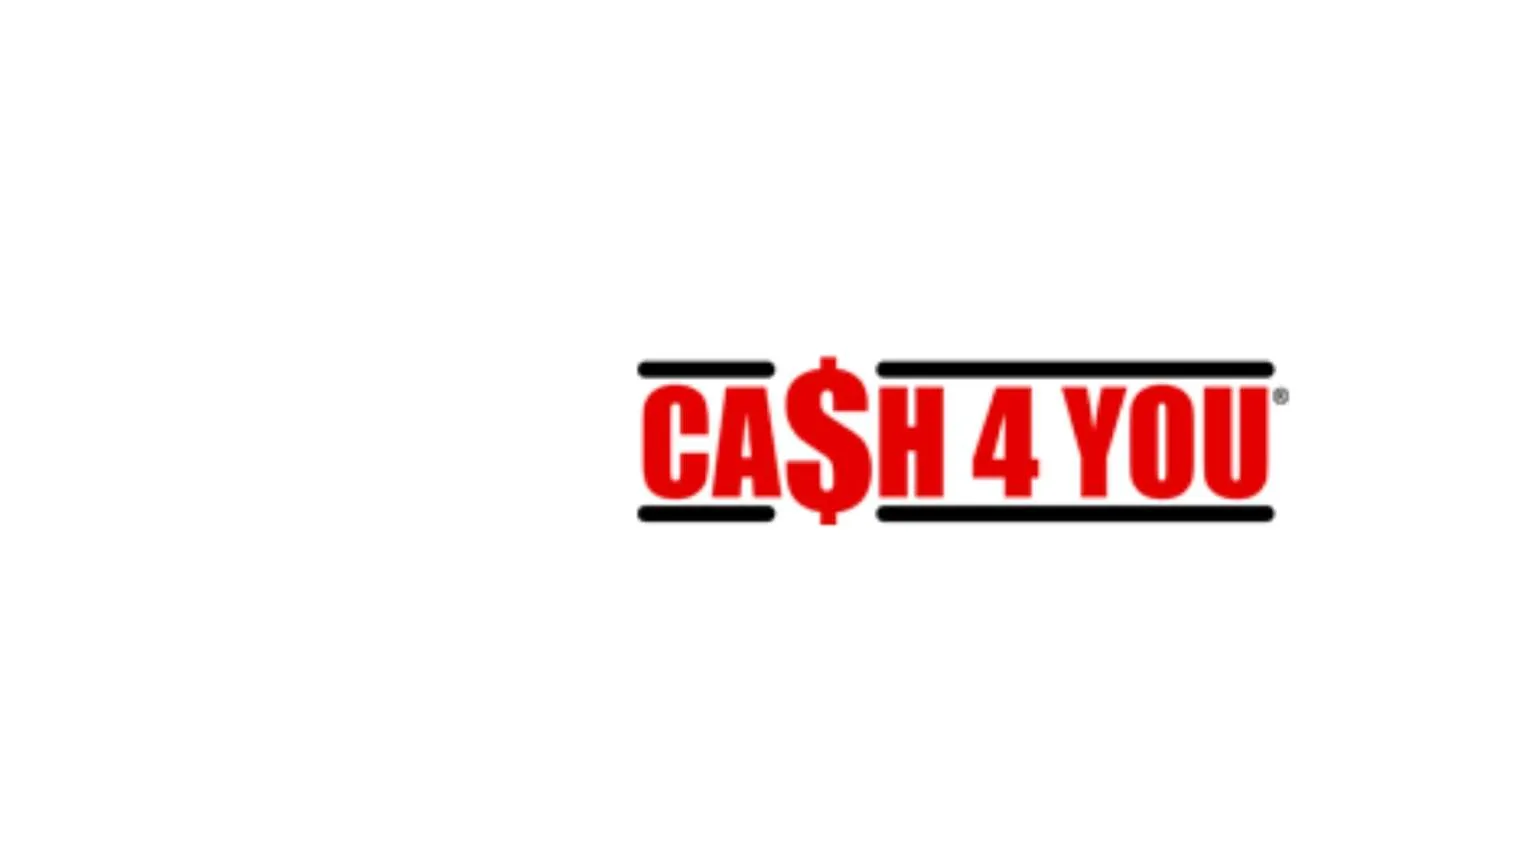 Cash 4 You Payday Loans Review July 2020 | Finder Canada